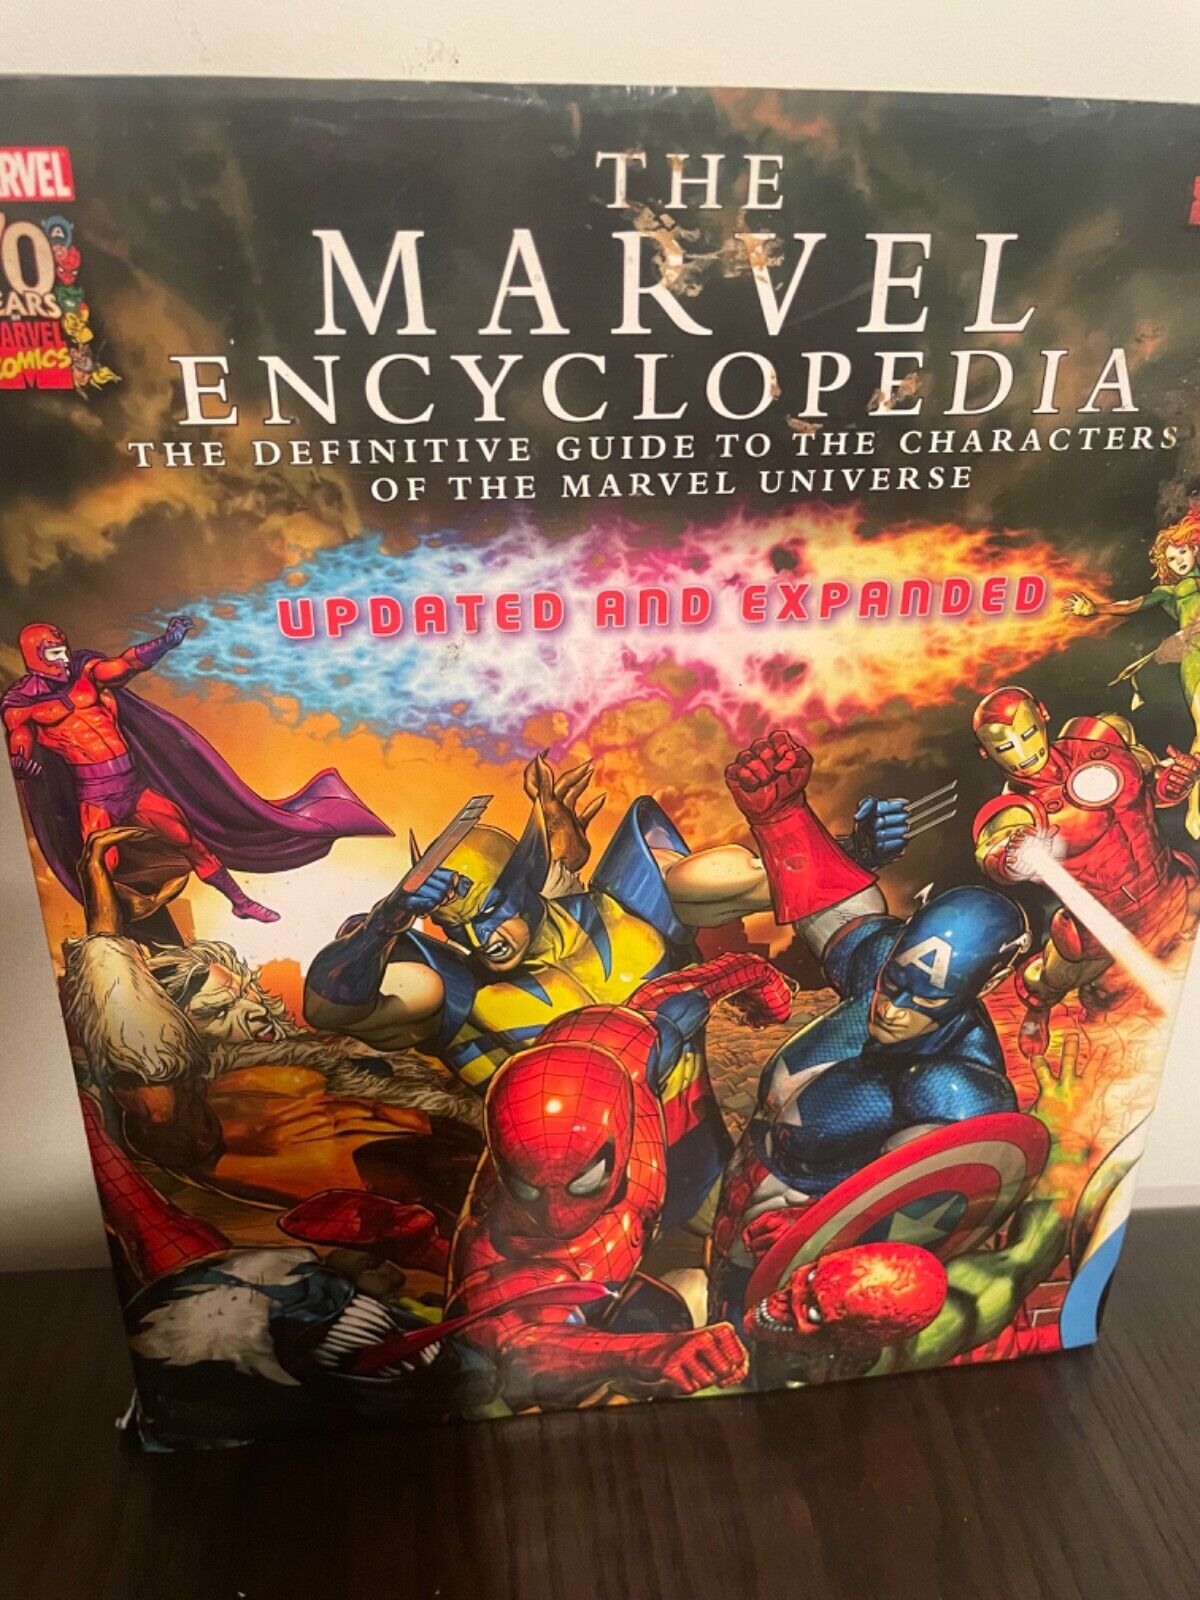 The Marvel Encyclopedia The Definitive Guide To The Characters Of The Marvel